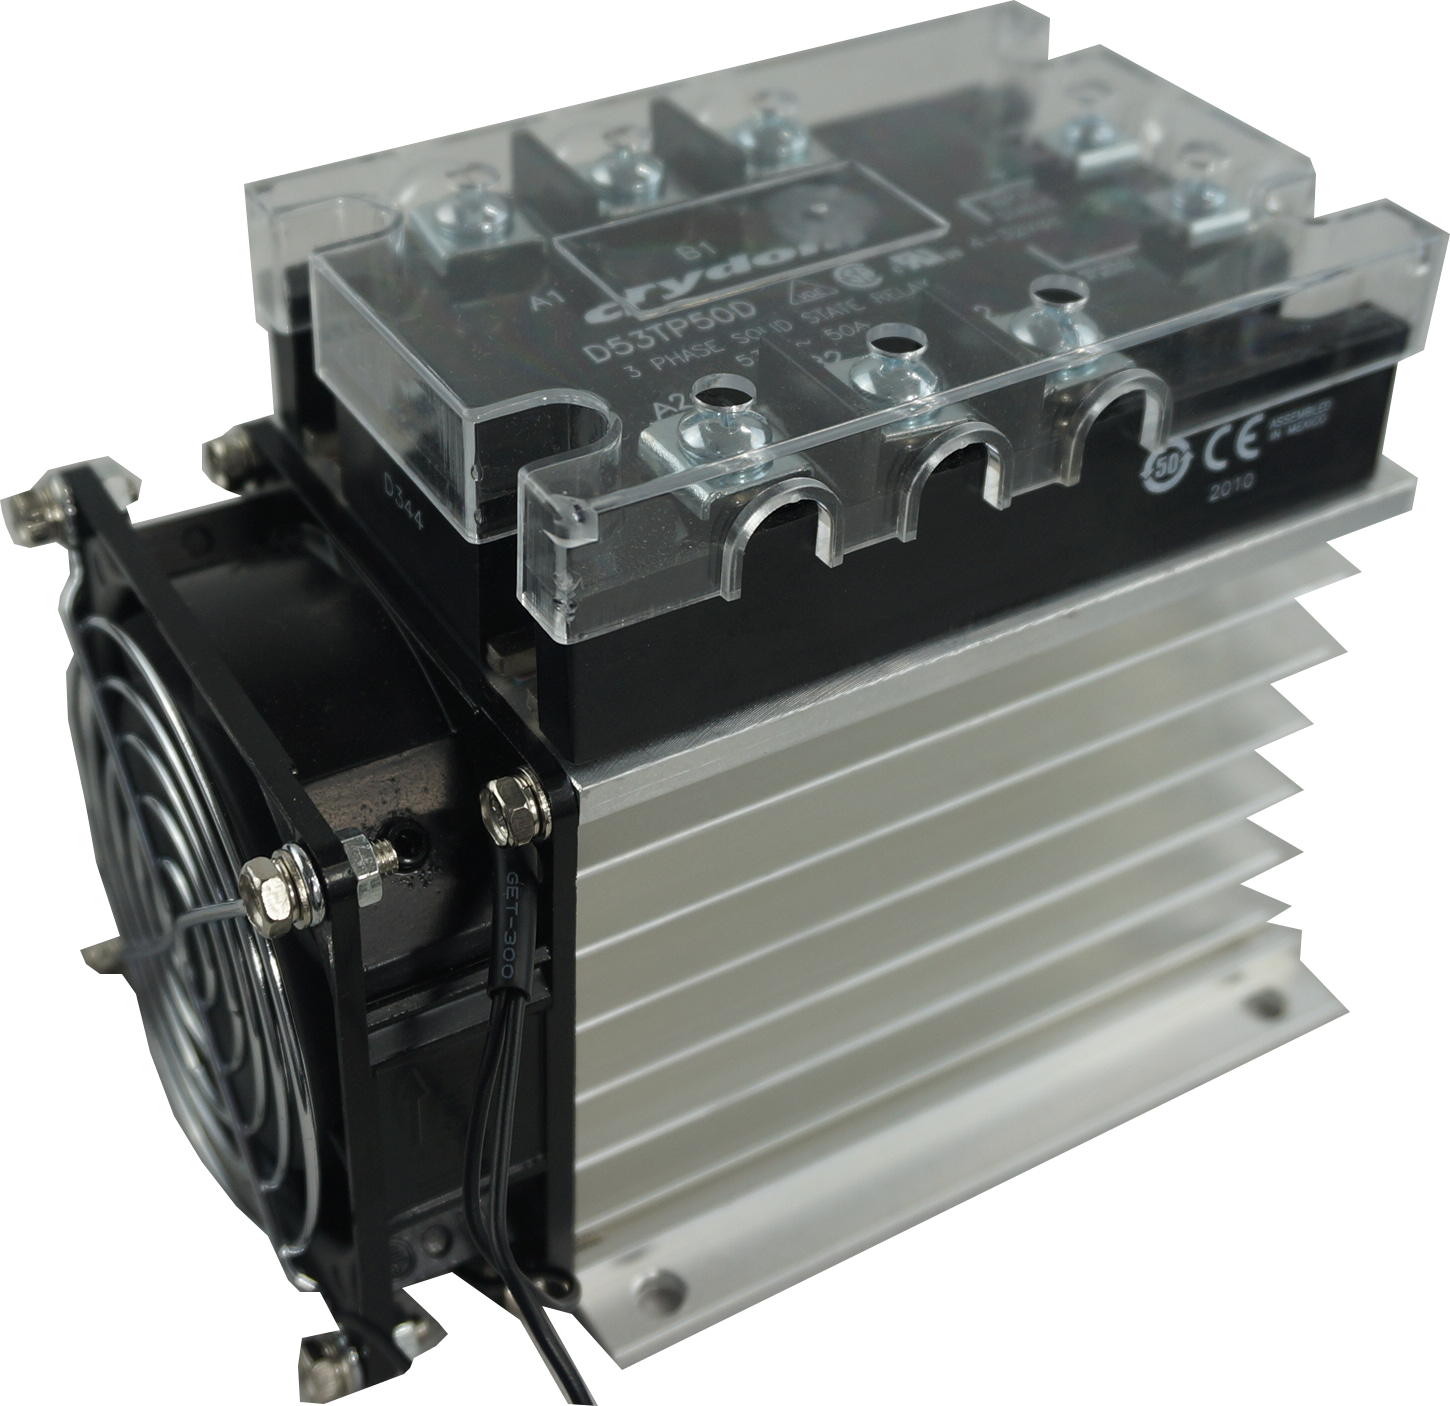 D53TP50D + HS212DR-F, Solid State Relay, and Heatsink Assembly, 3 Phase 4-32VDC Control, 36 Amp per phase @ 40 Deg C, 48-530VAC Load, LED Status Indicator